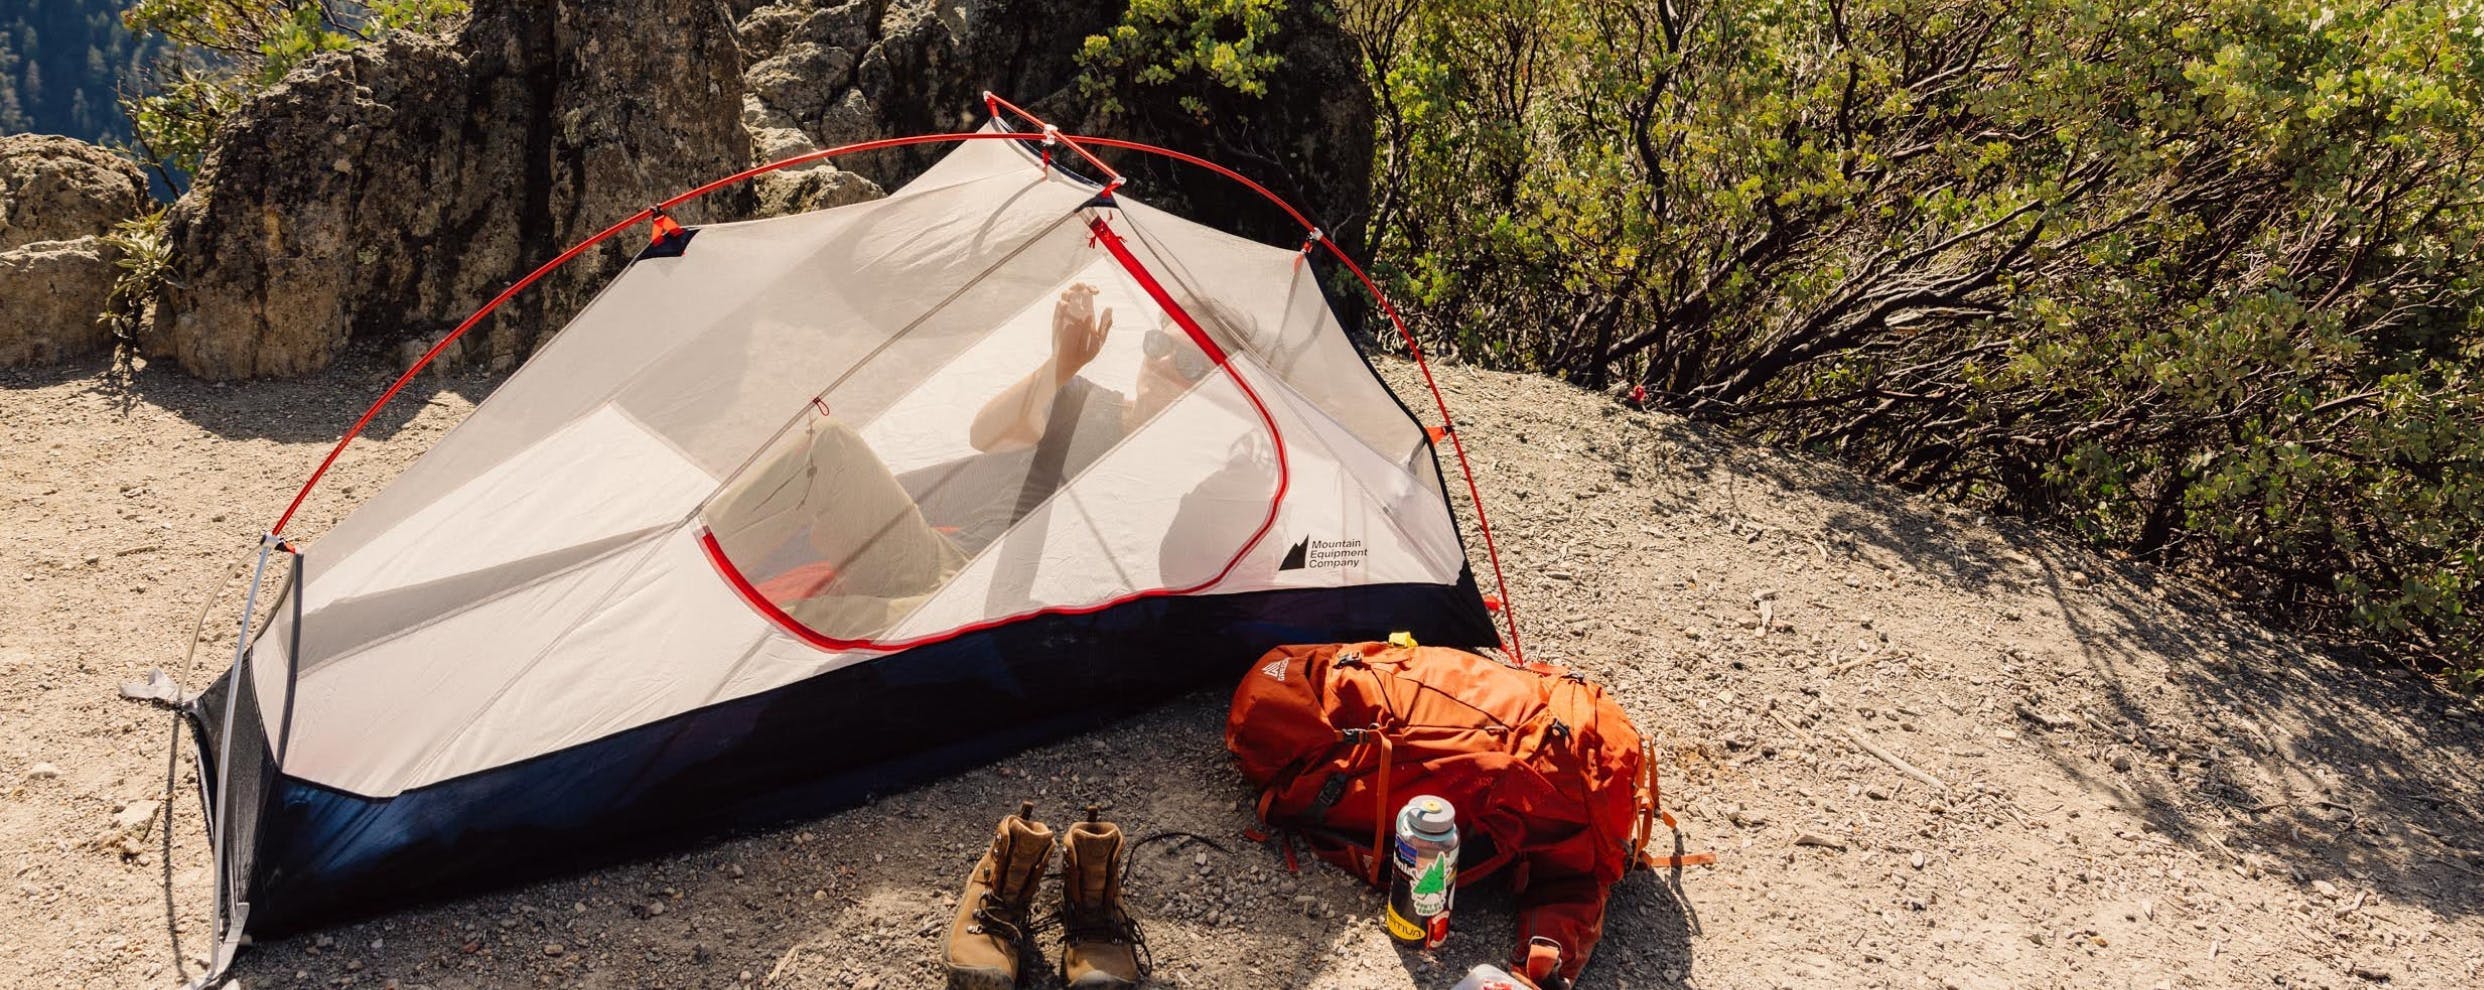 MEC backpacking tents. Entry-level to expert, find lightweight tents for weekend canoe trips or technical missions.